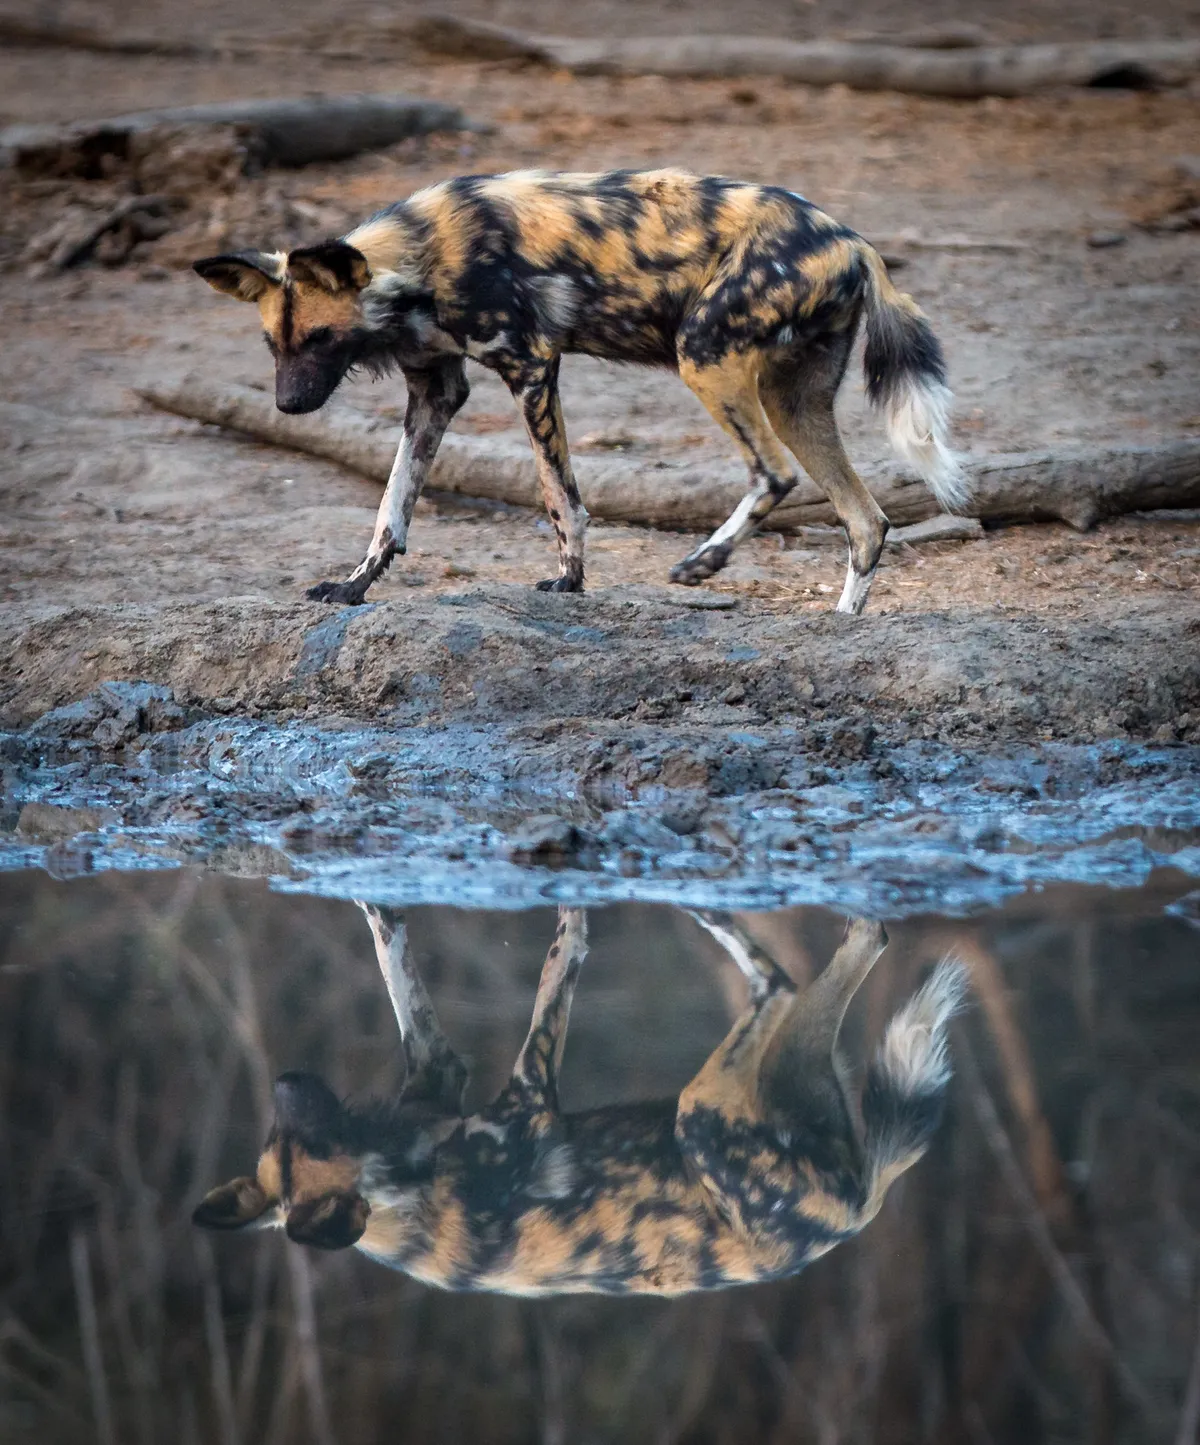 A wild dog looks spots its reflection in the water as it moves along a muddy bank near the edge of a water pool.